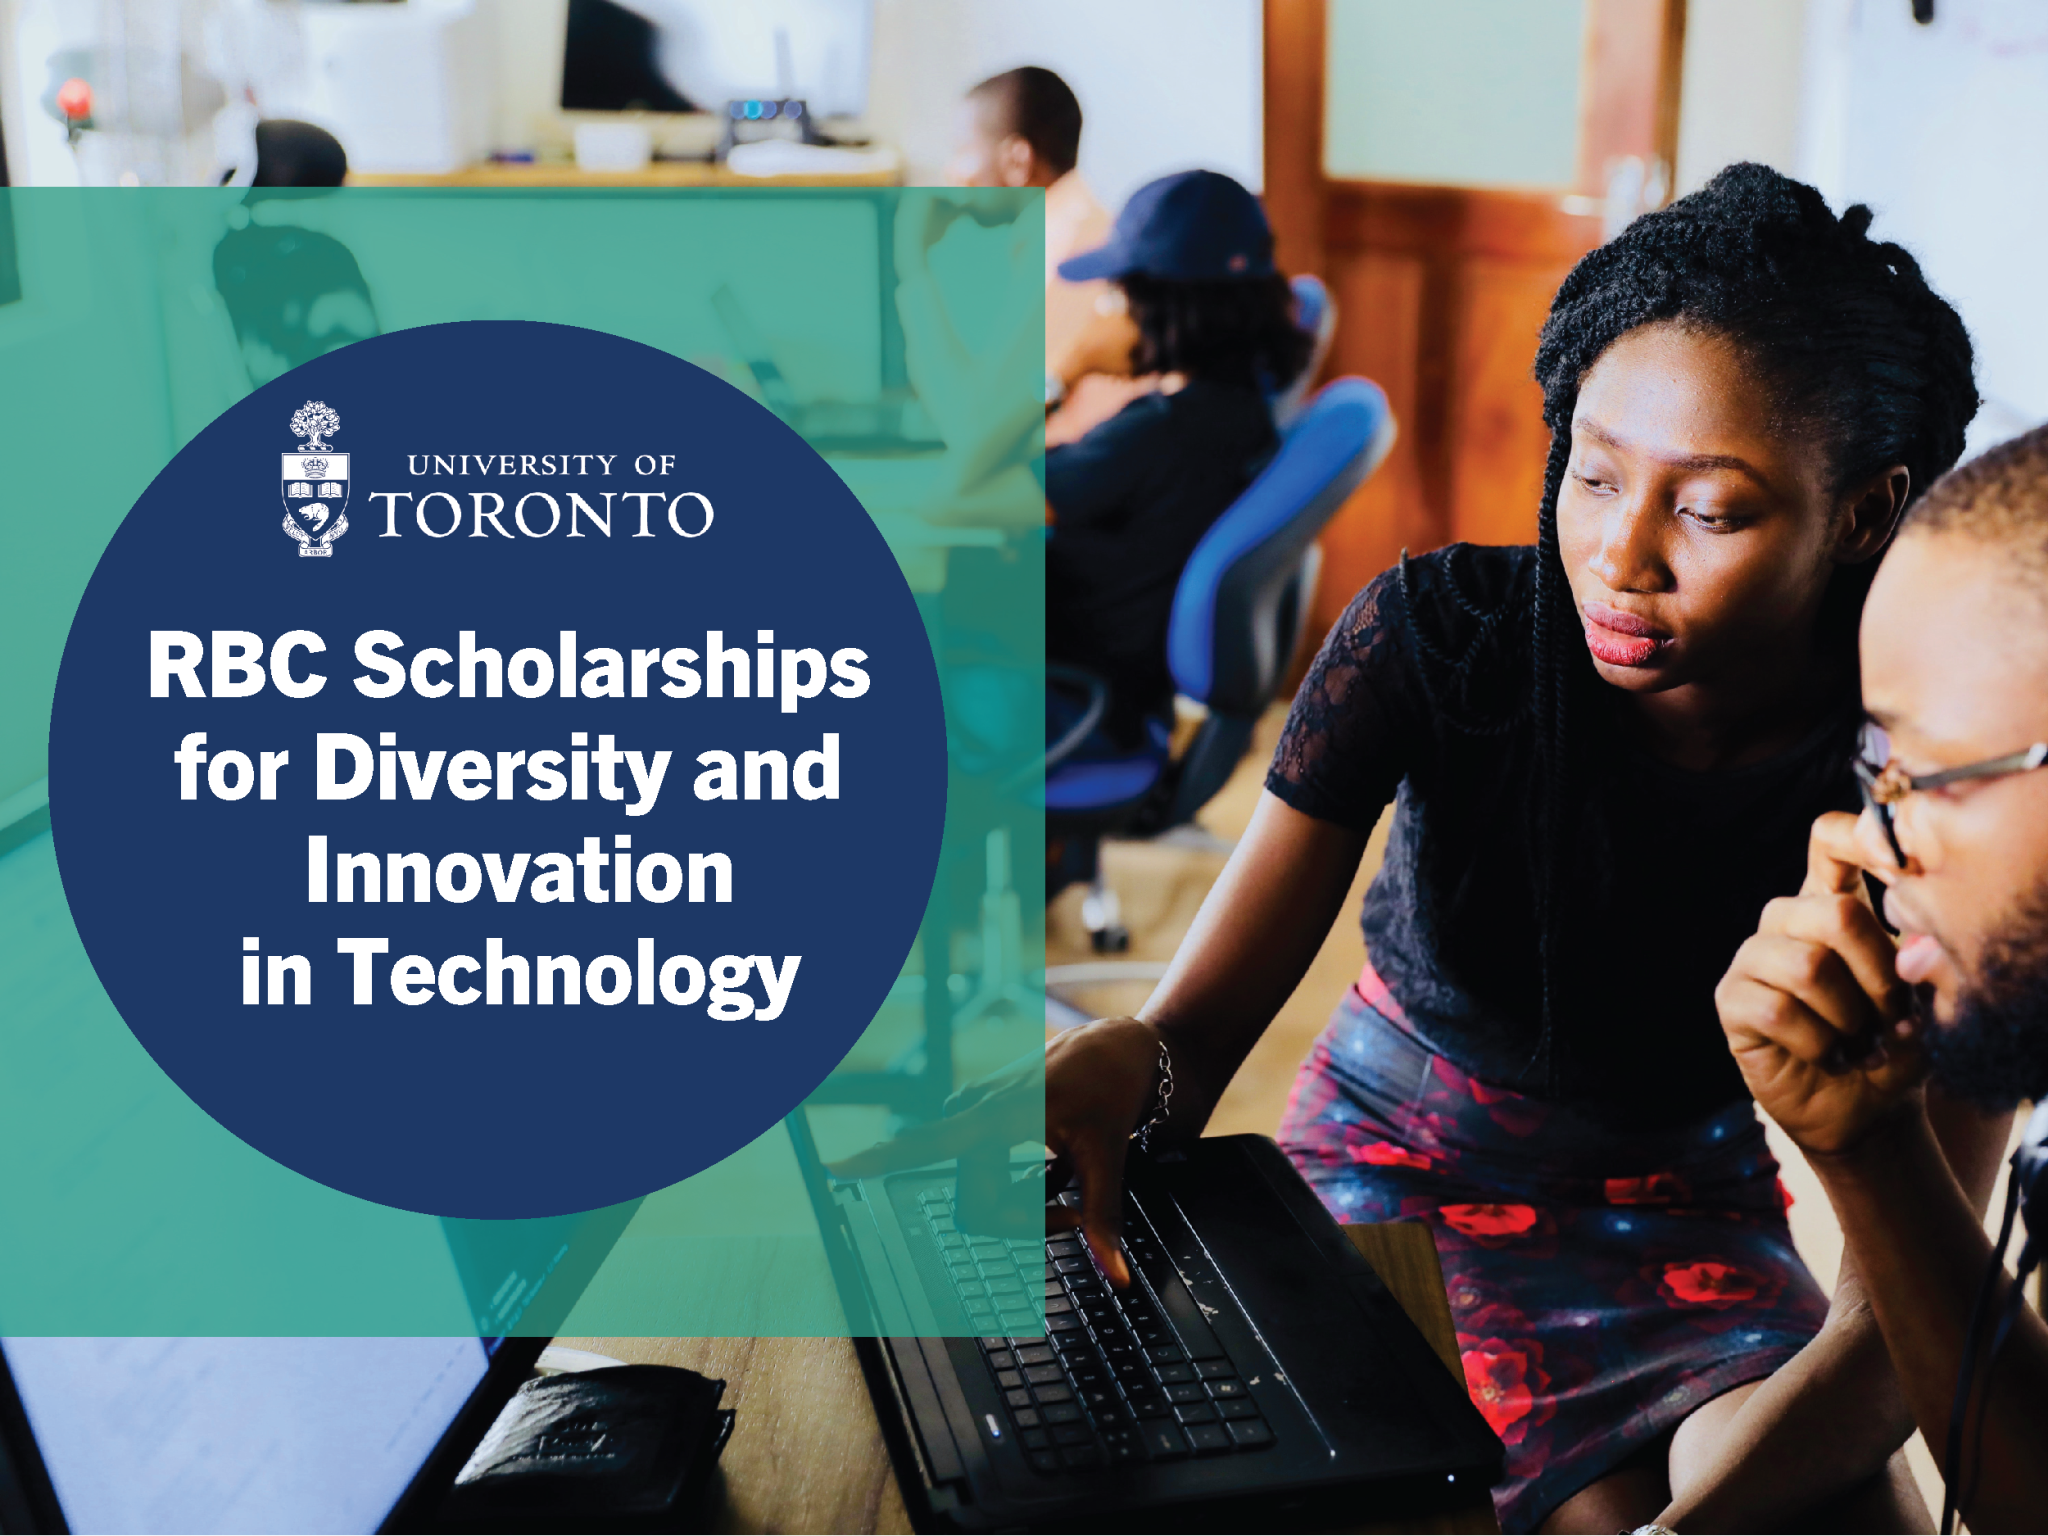 Apply by July 27: RBC Scholarships for Diversity and Innovation in Technology